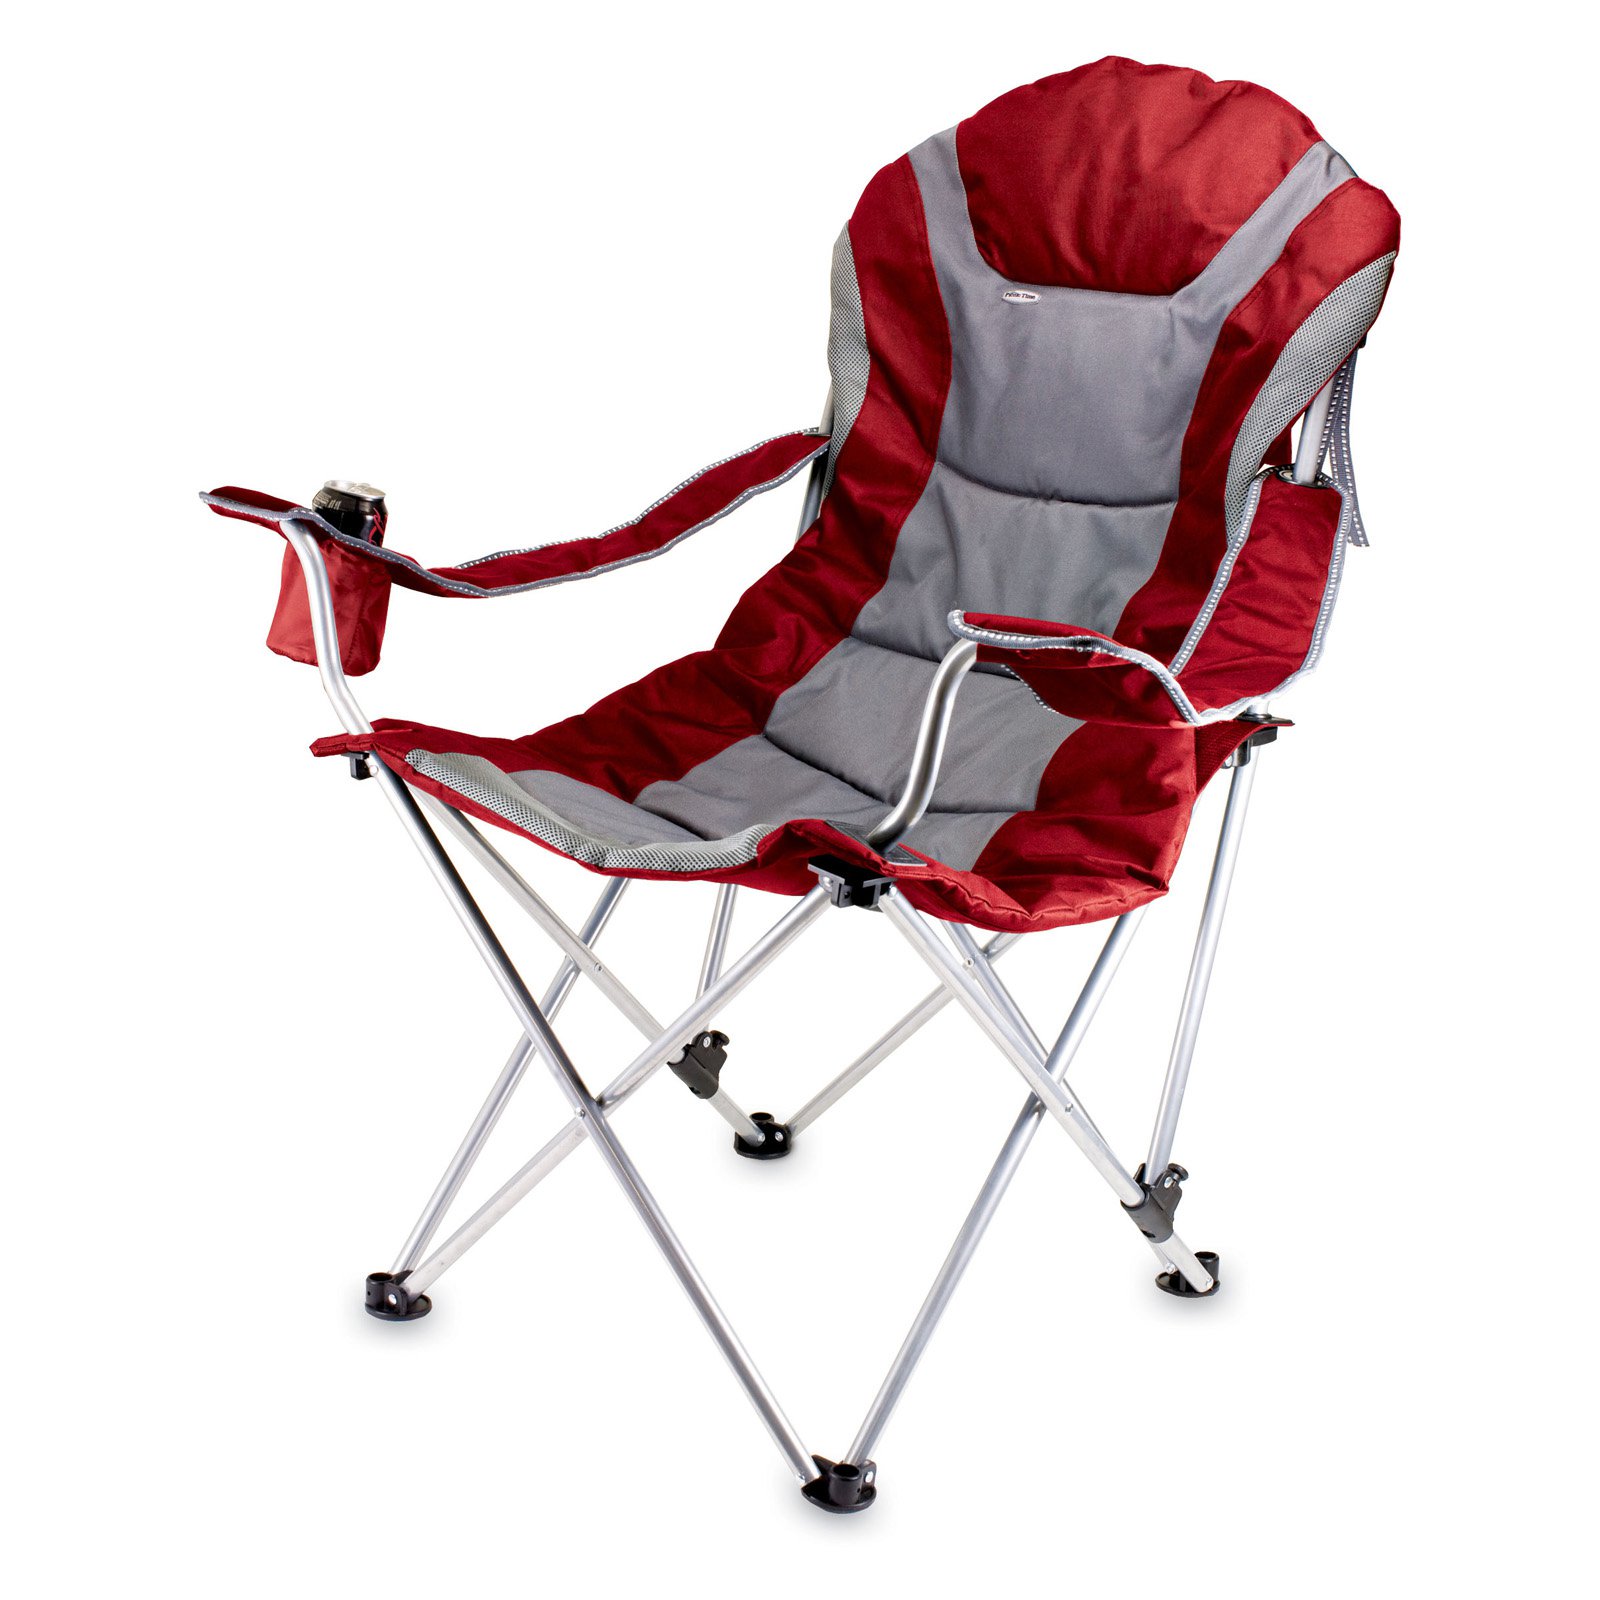 Picnic Time 803-00-100-000-0 Reclining Camp Chair - Red - image 3 of 11